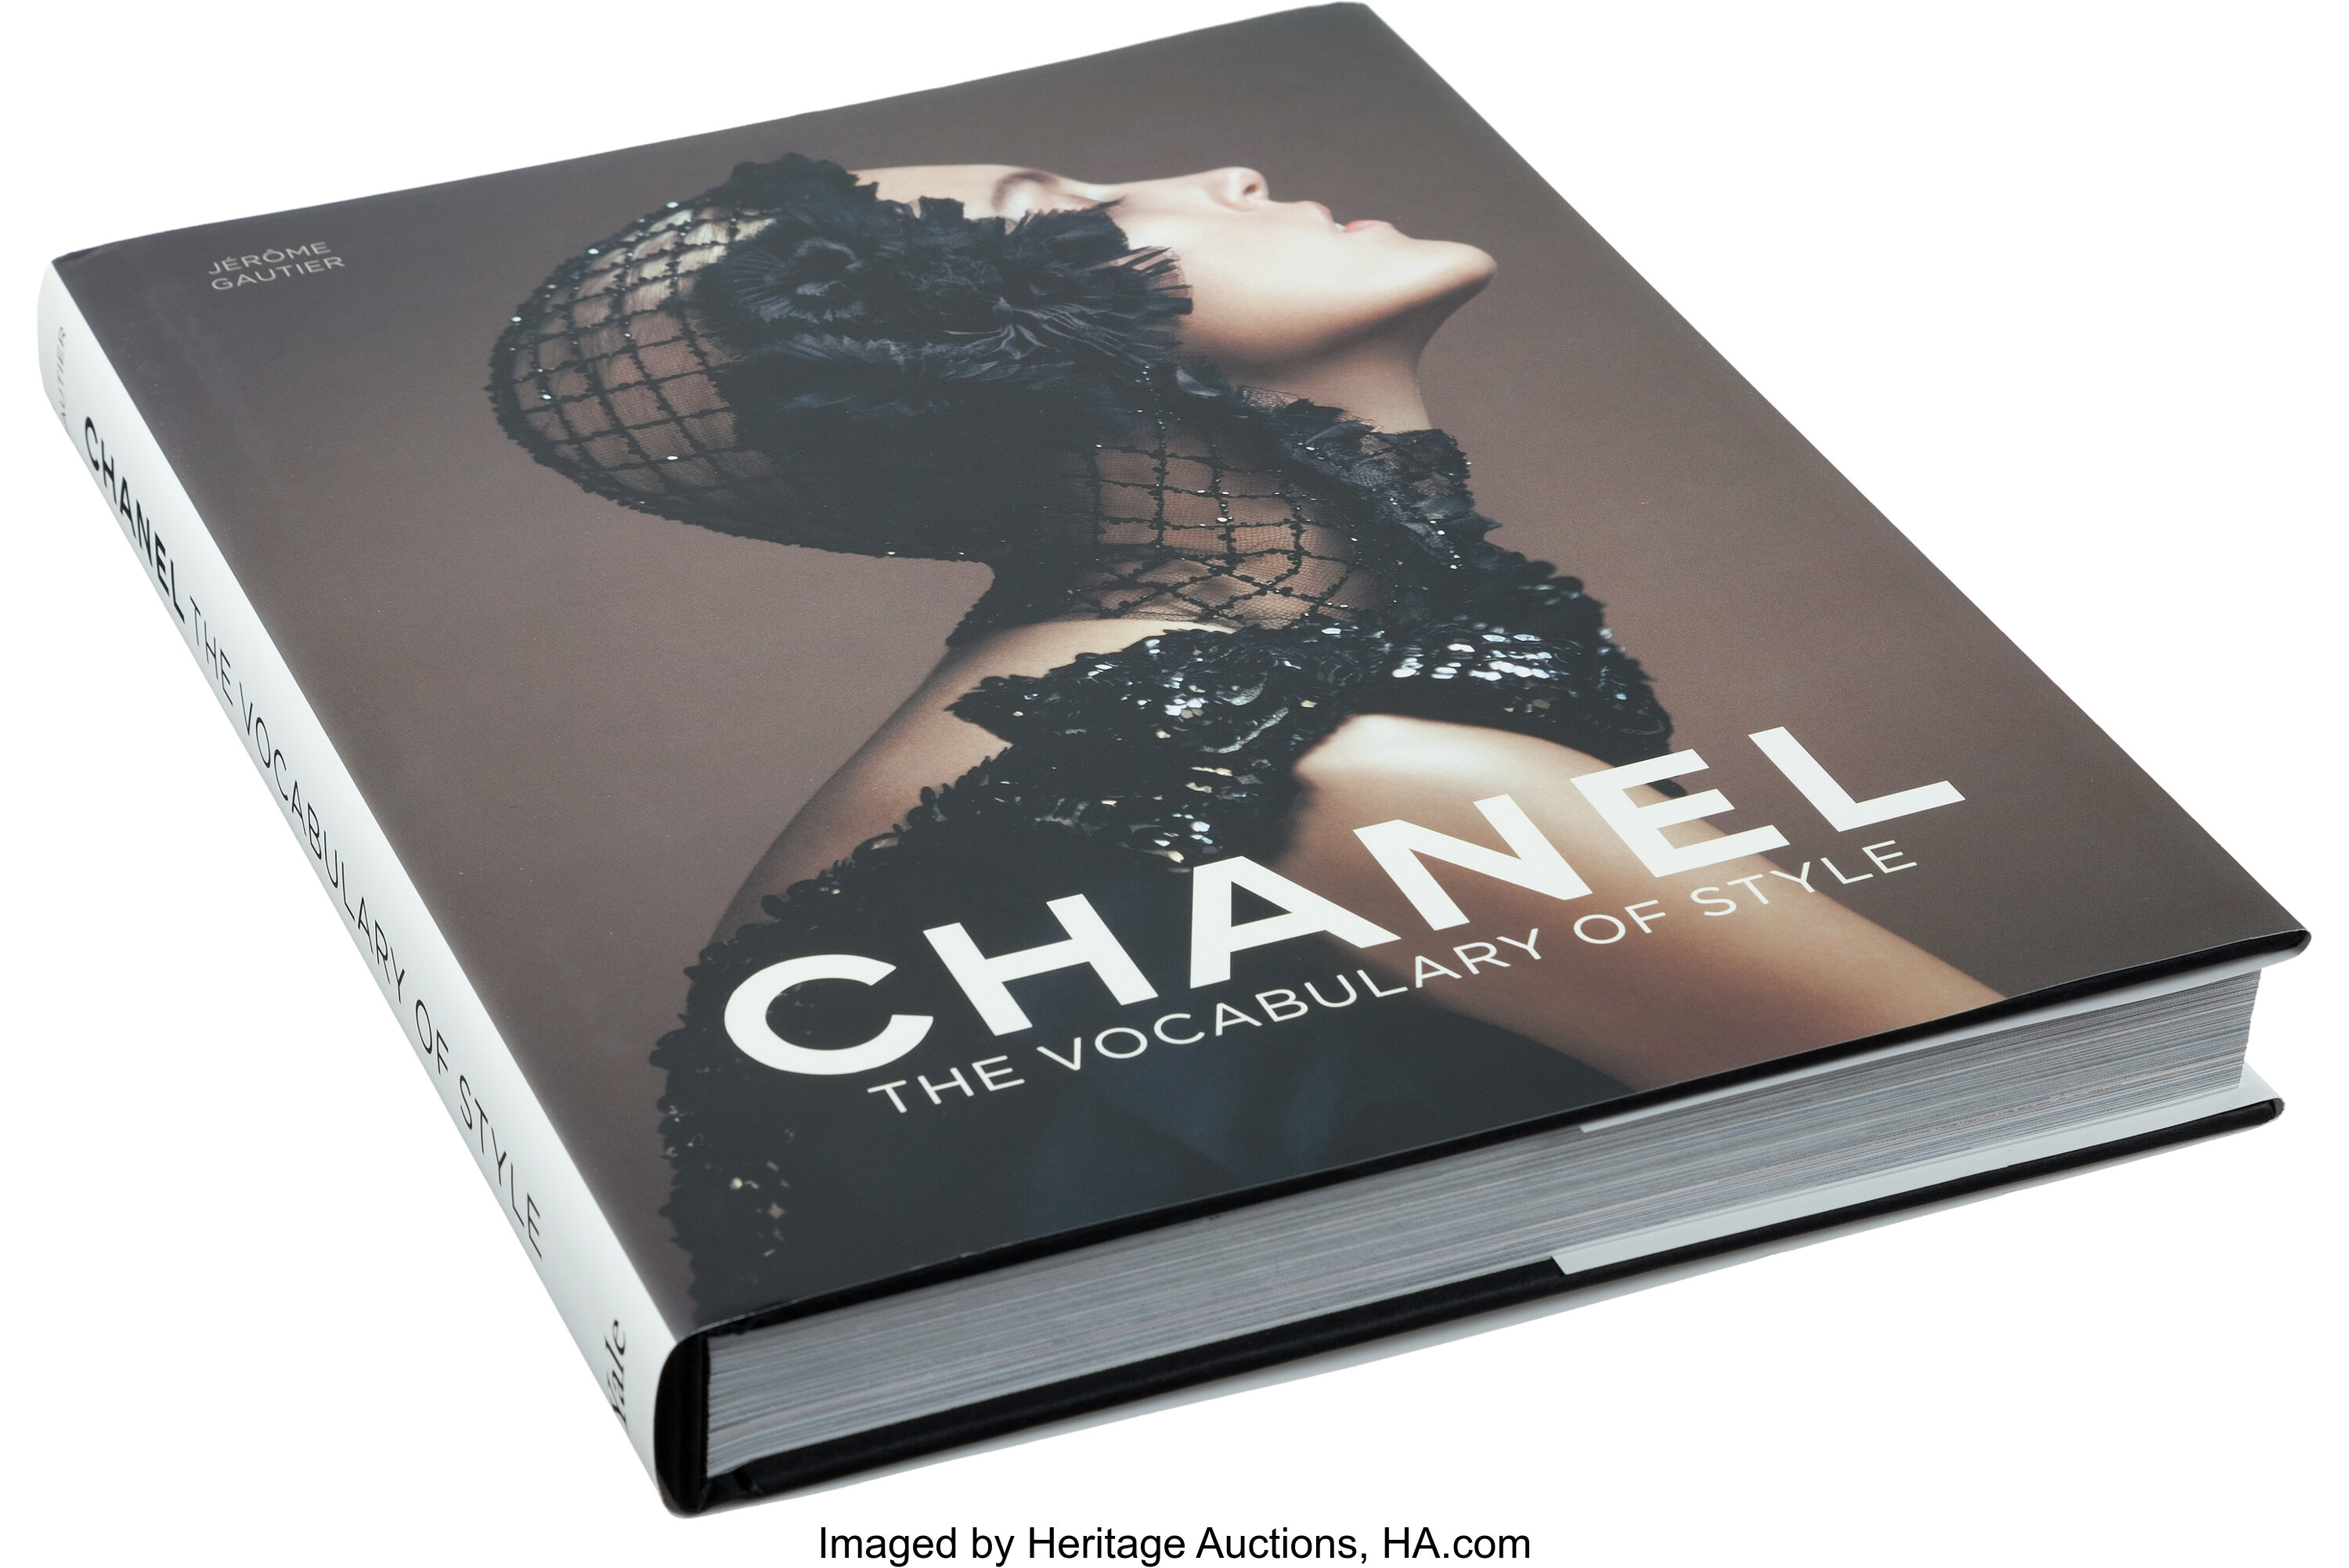 Chanel Pink Vocabulary of Style by Jérôme Gautier Hardcover Book. | Lot  #19022 | Heritage Auctions